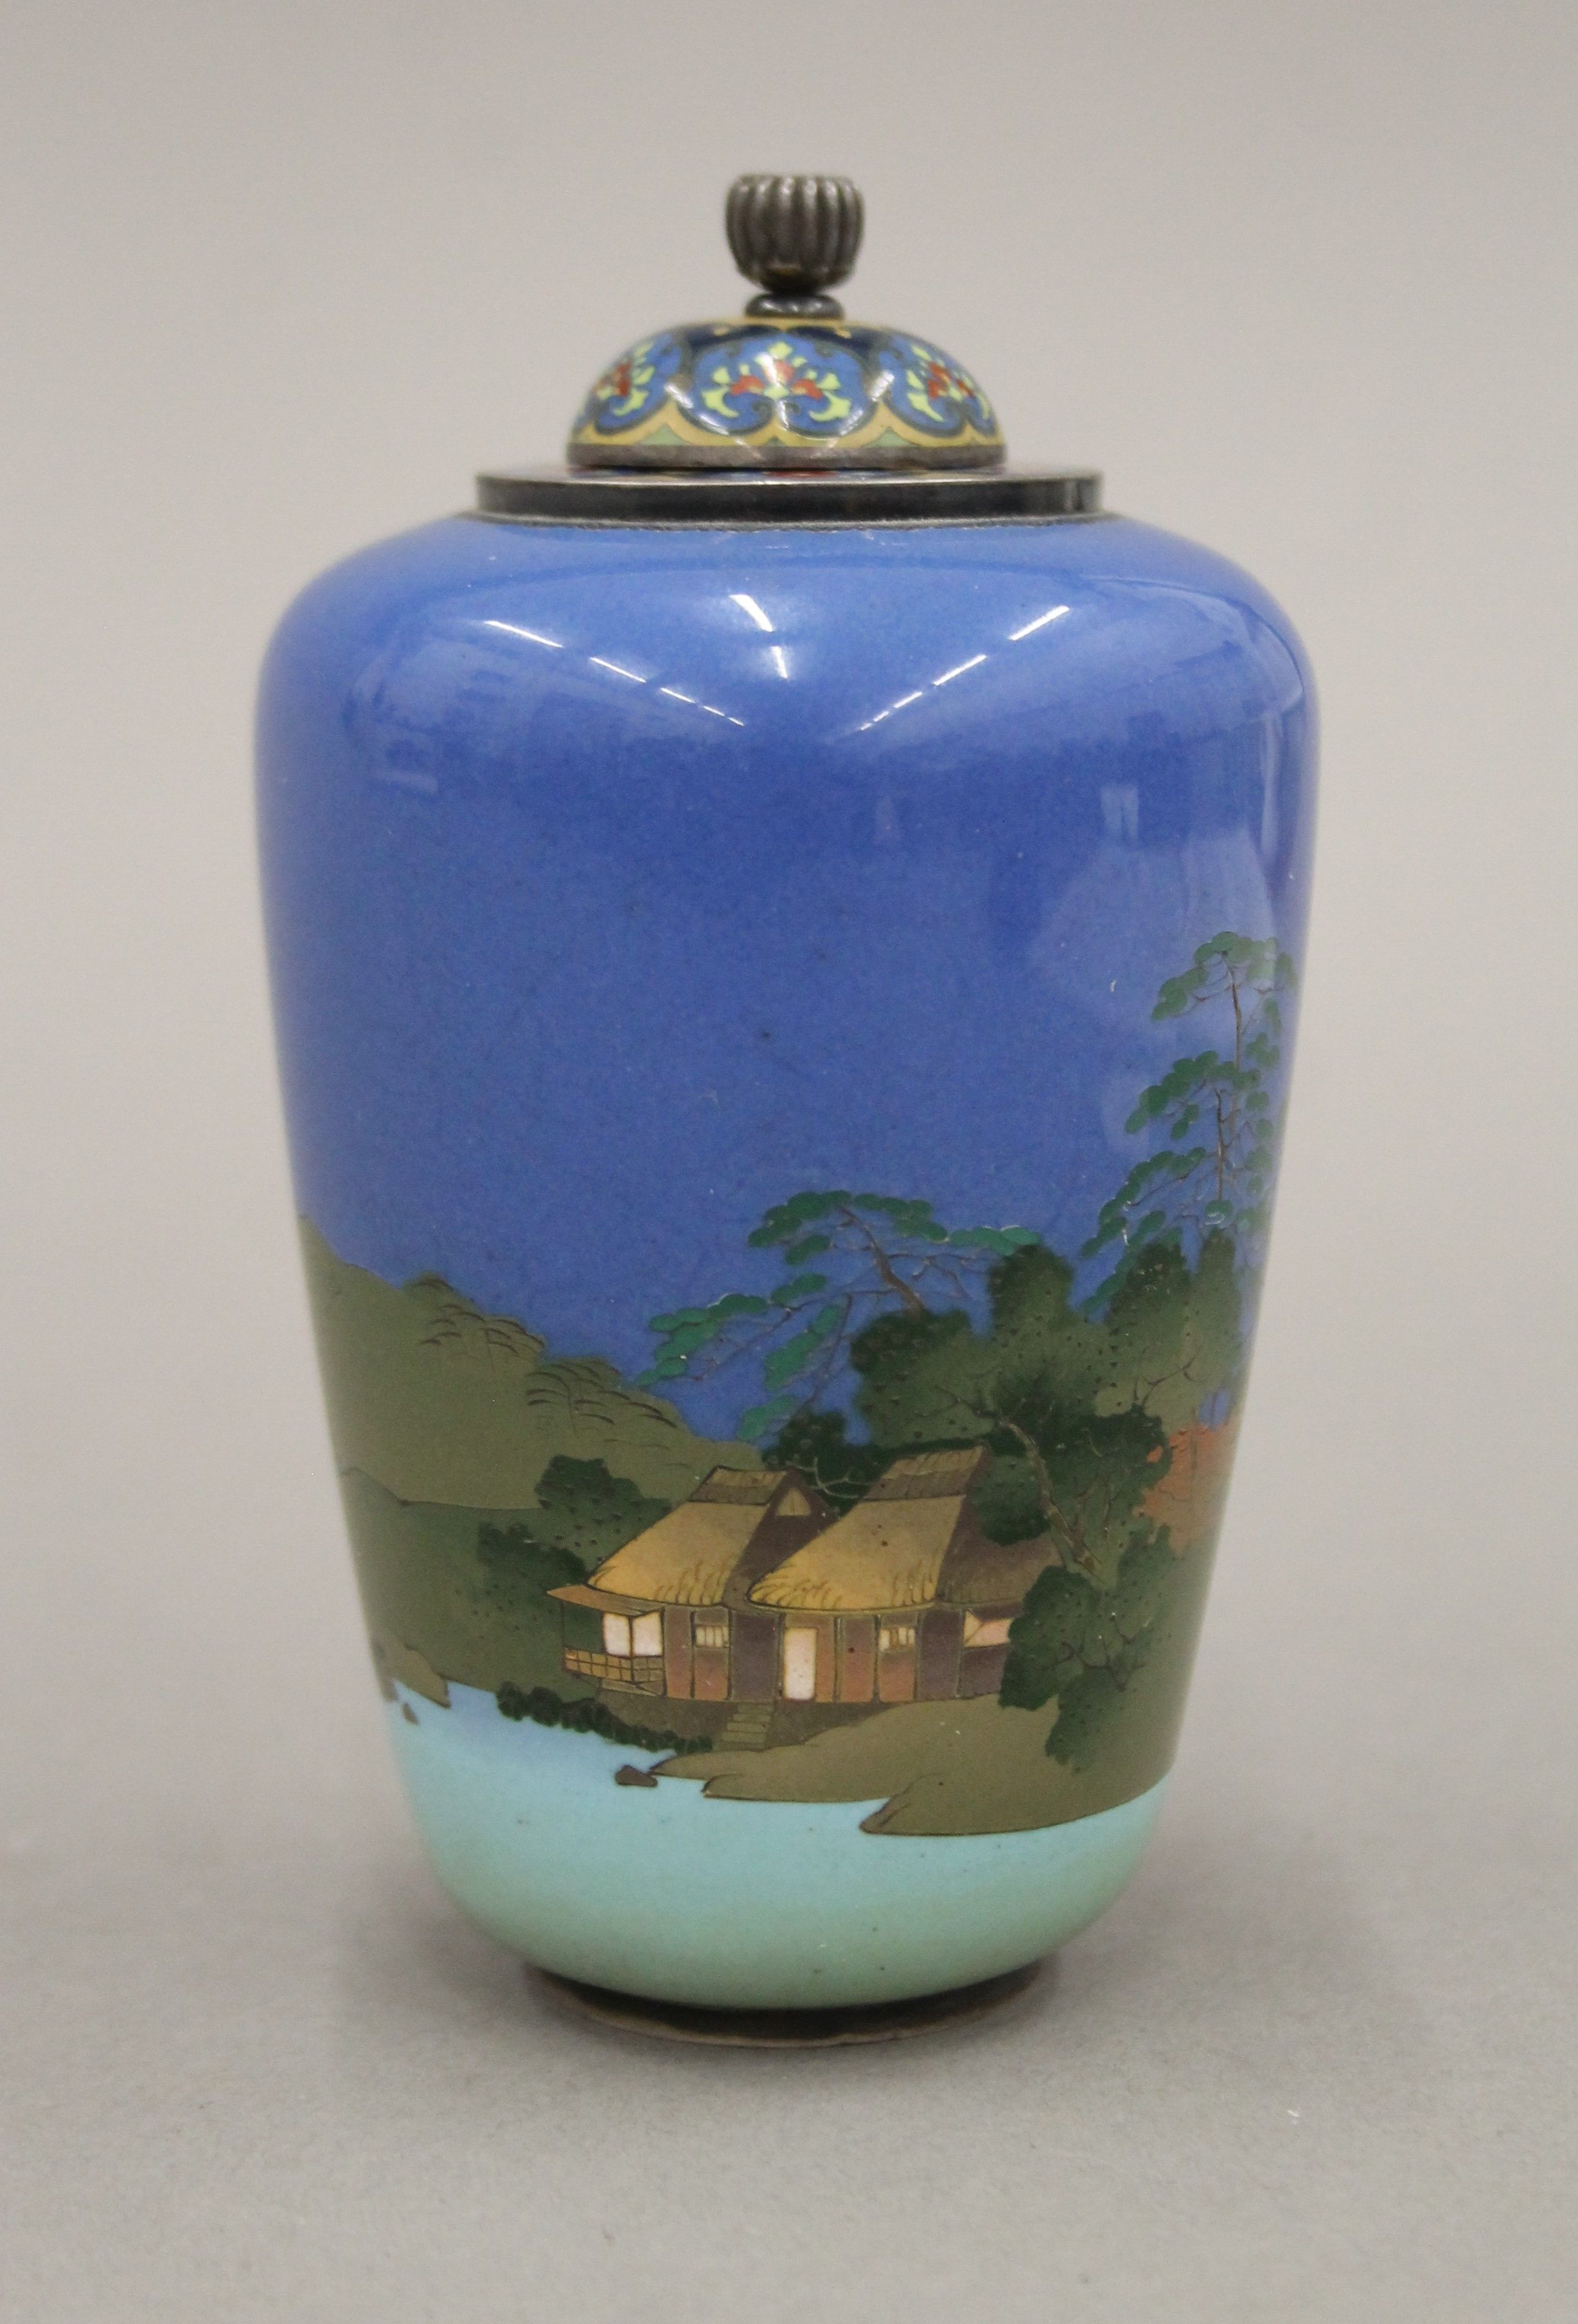 An early 20th century Japanese silver and cloisonne enamel lidded vase decorated with shoreline - Image 2 of 6